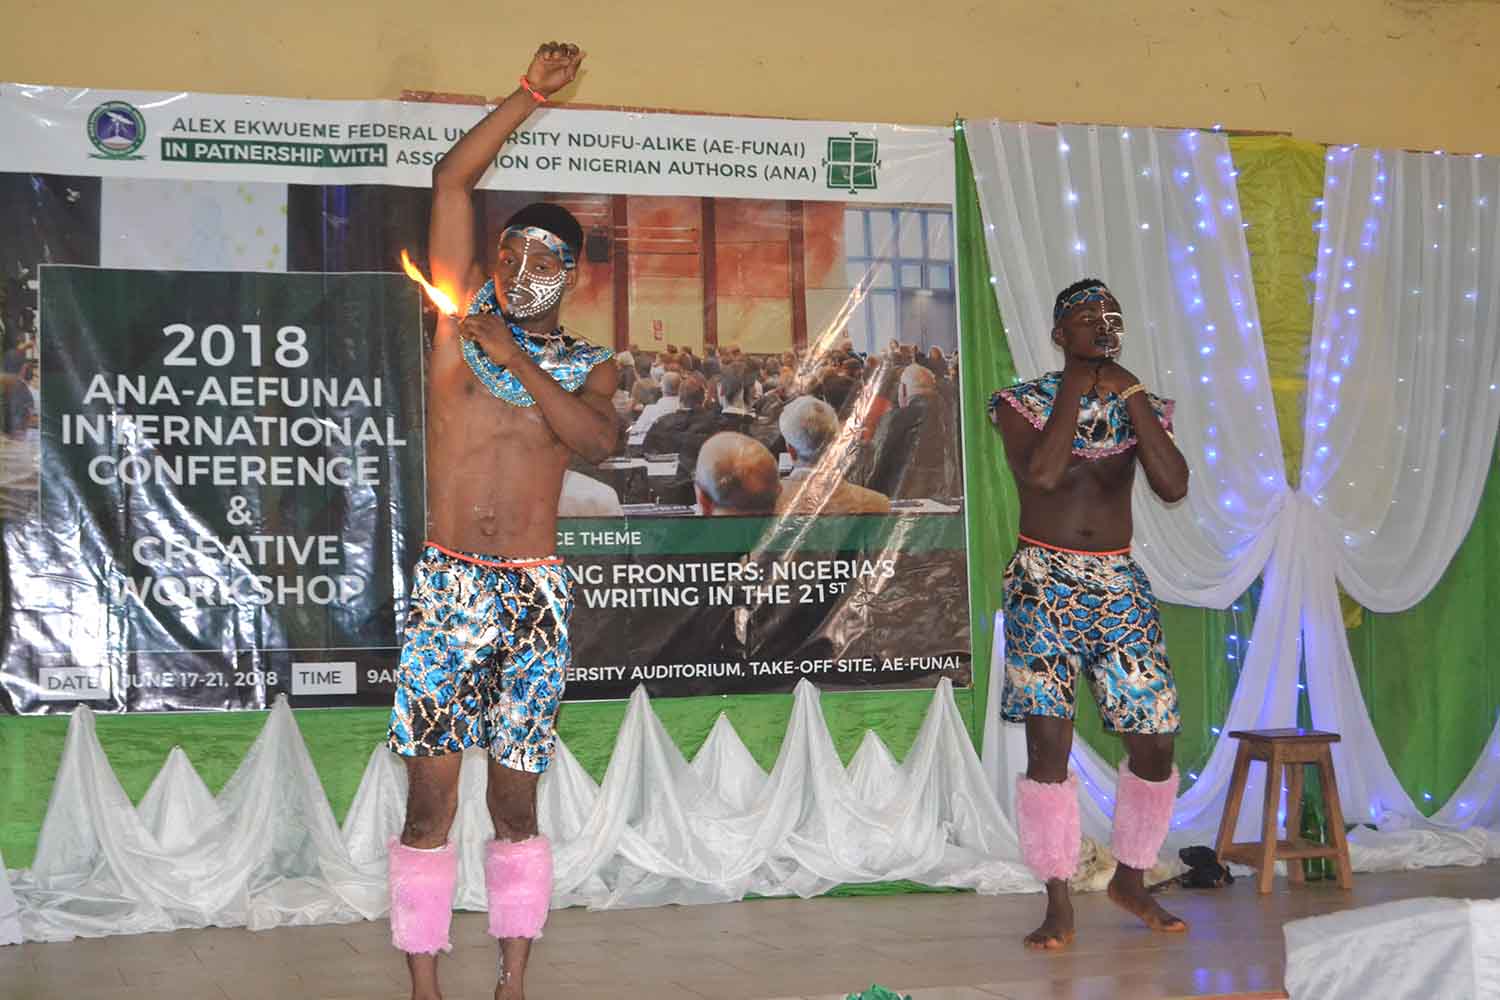 Performers during the 2018 ANA/FUNAI conference